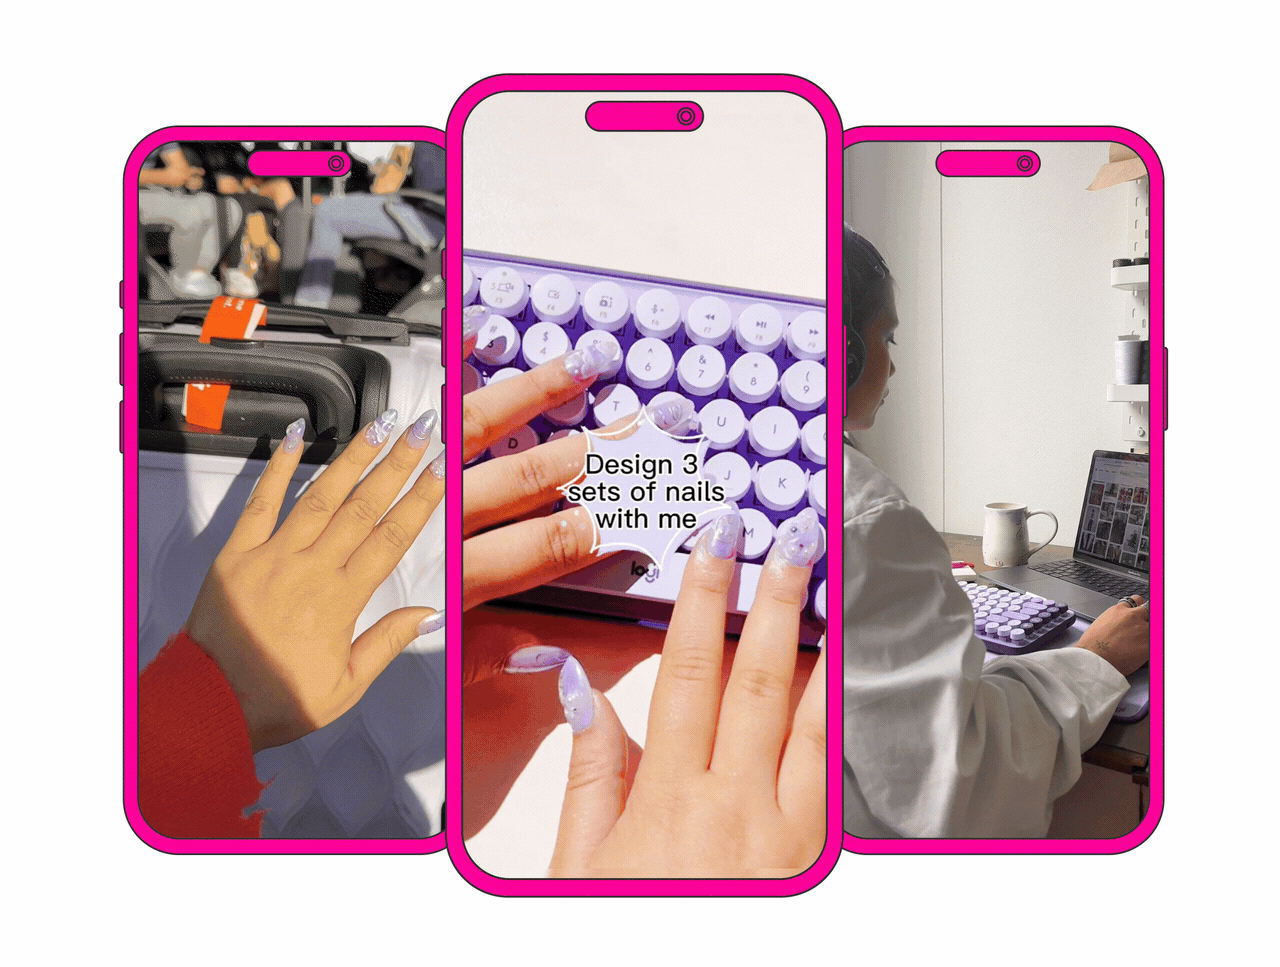 Tiktok marketing was successful, with three creators getting their nails done in the colours of the new keyboards